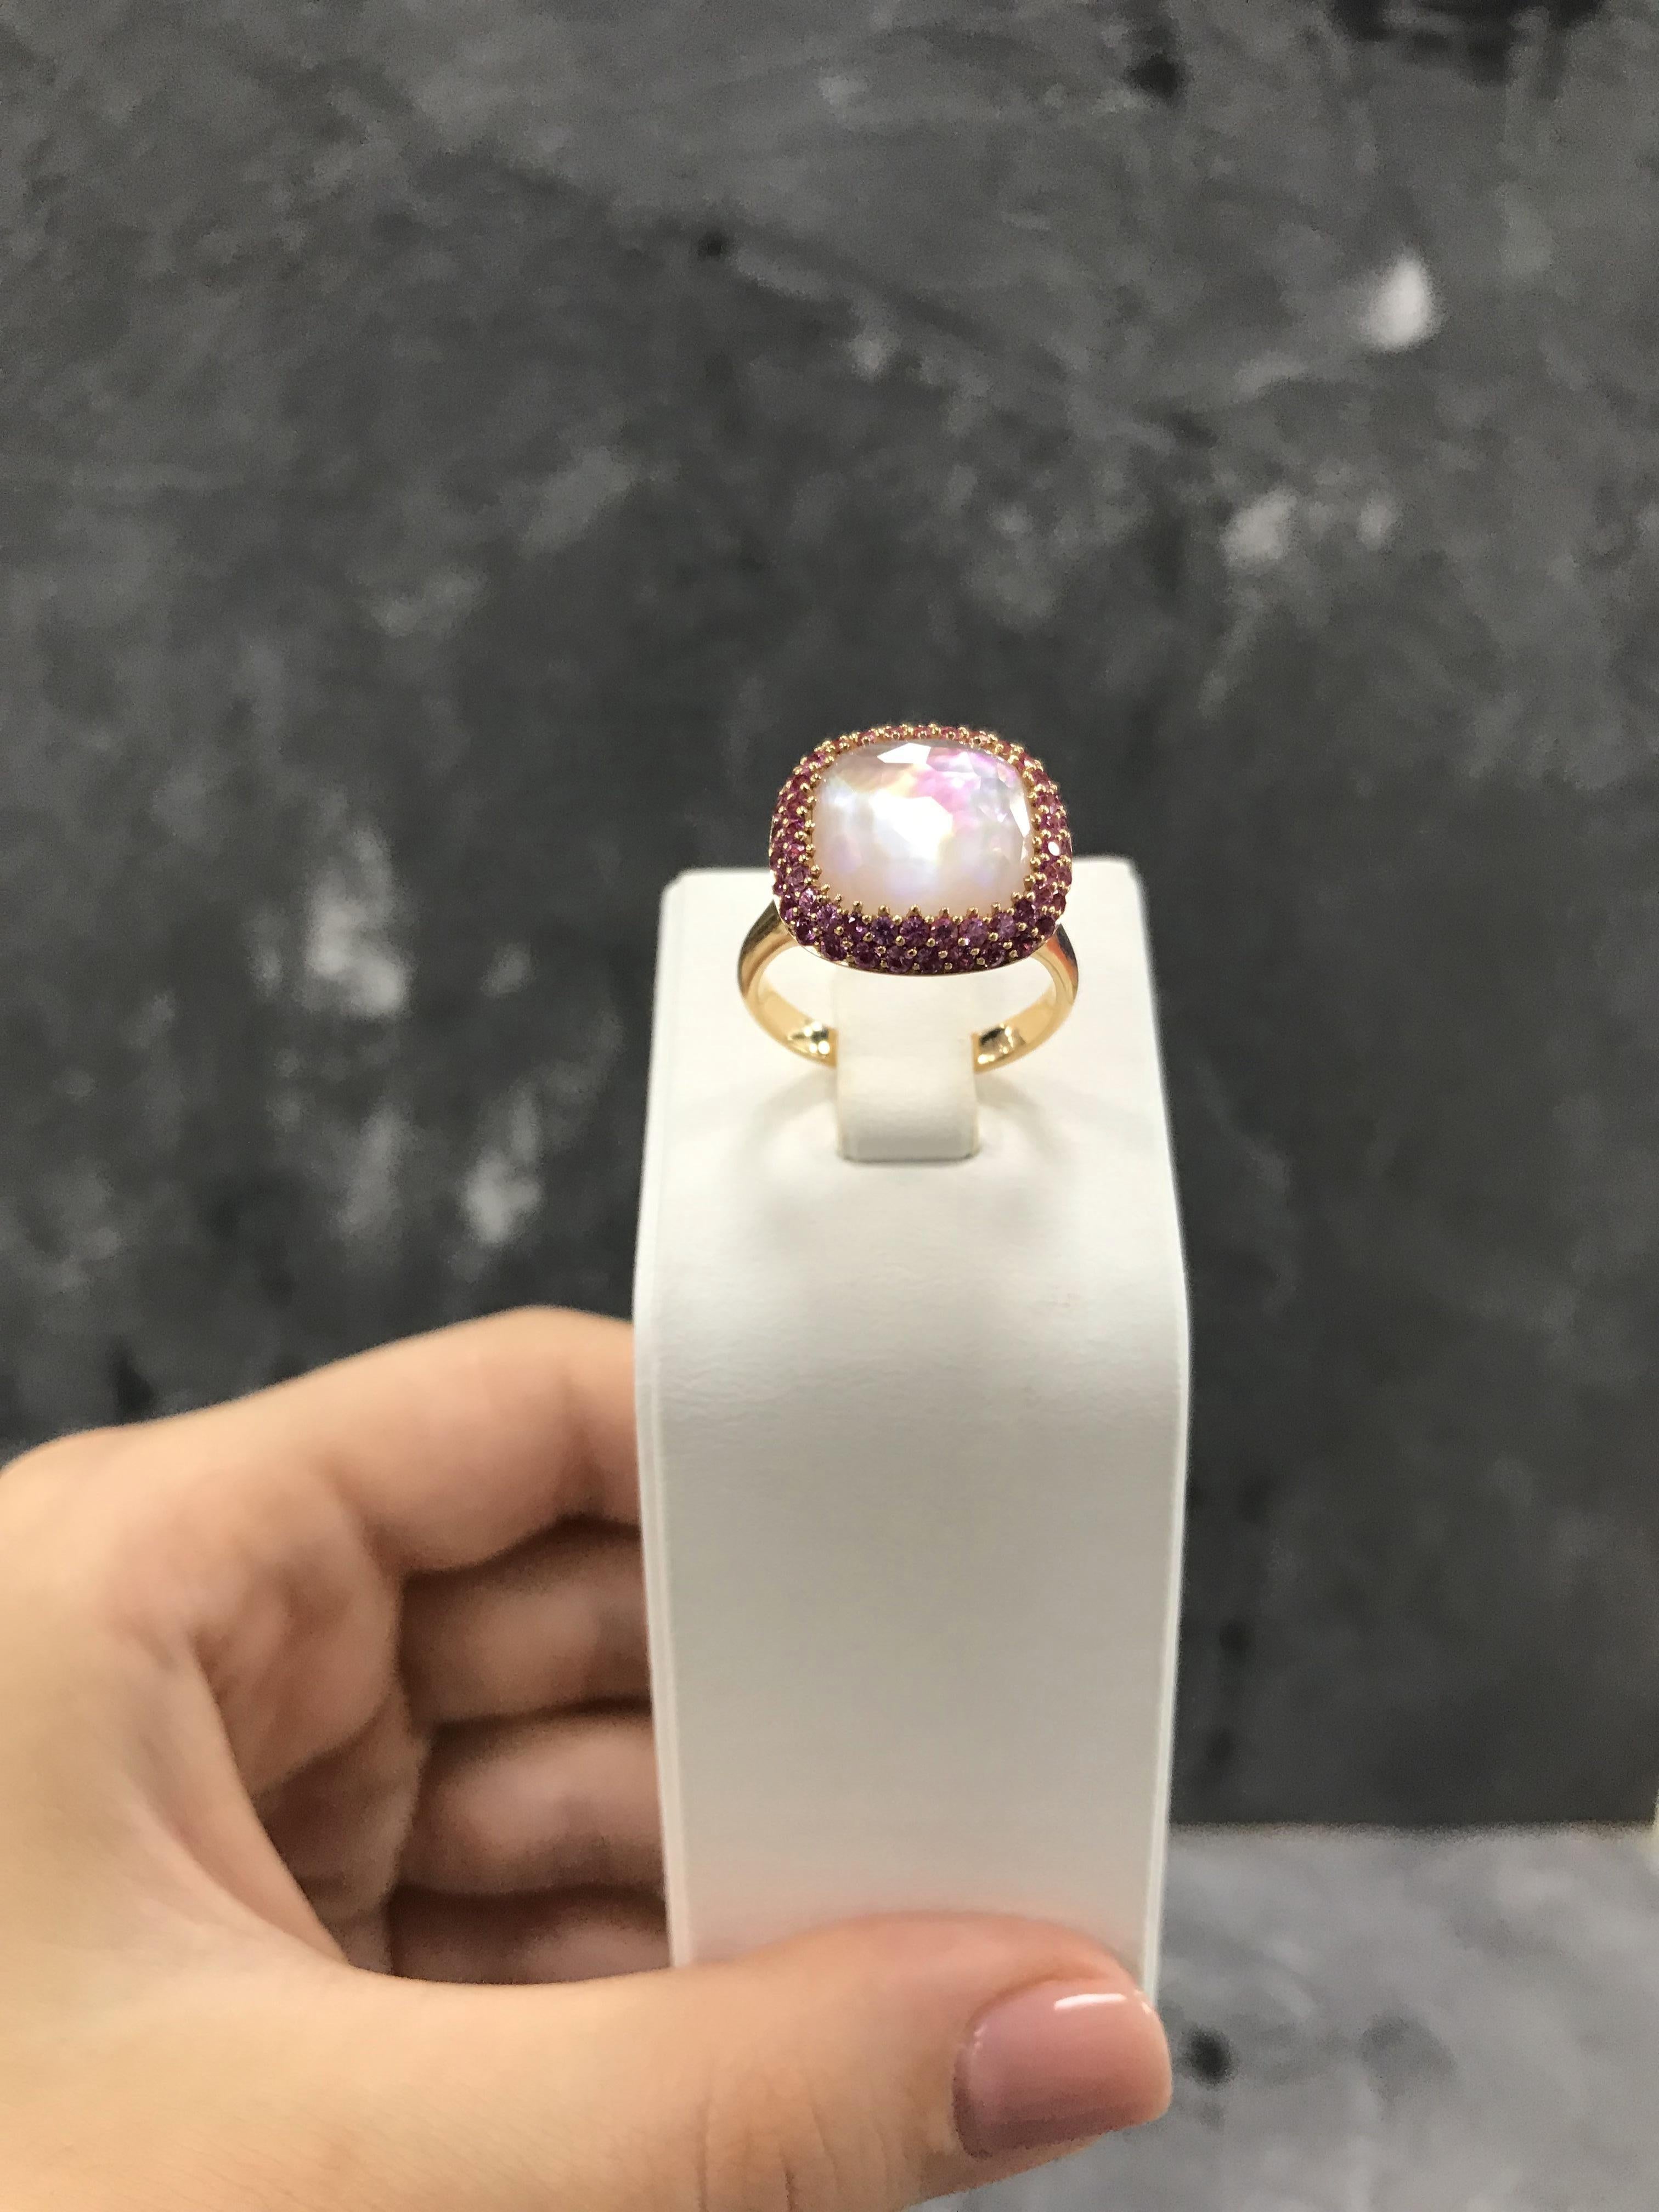 Rose Gold 18 K
Pink sapphire58-Round-1,14 3/2A 
Mother of pearl 1-1,1 ct 
Rock crystal 1-Square-4,7 1/1A  
Weight 8,31 gram
Size 17,5

With a heritage of ancient fine Swiss jewelry traditions, NATKINA is a Geneva based jewellery brand, which creates